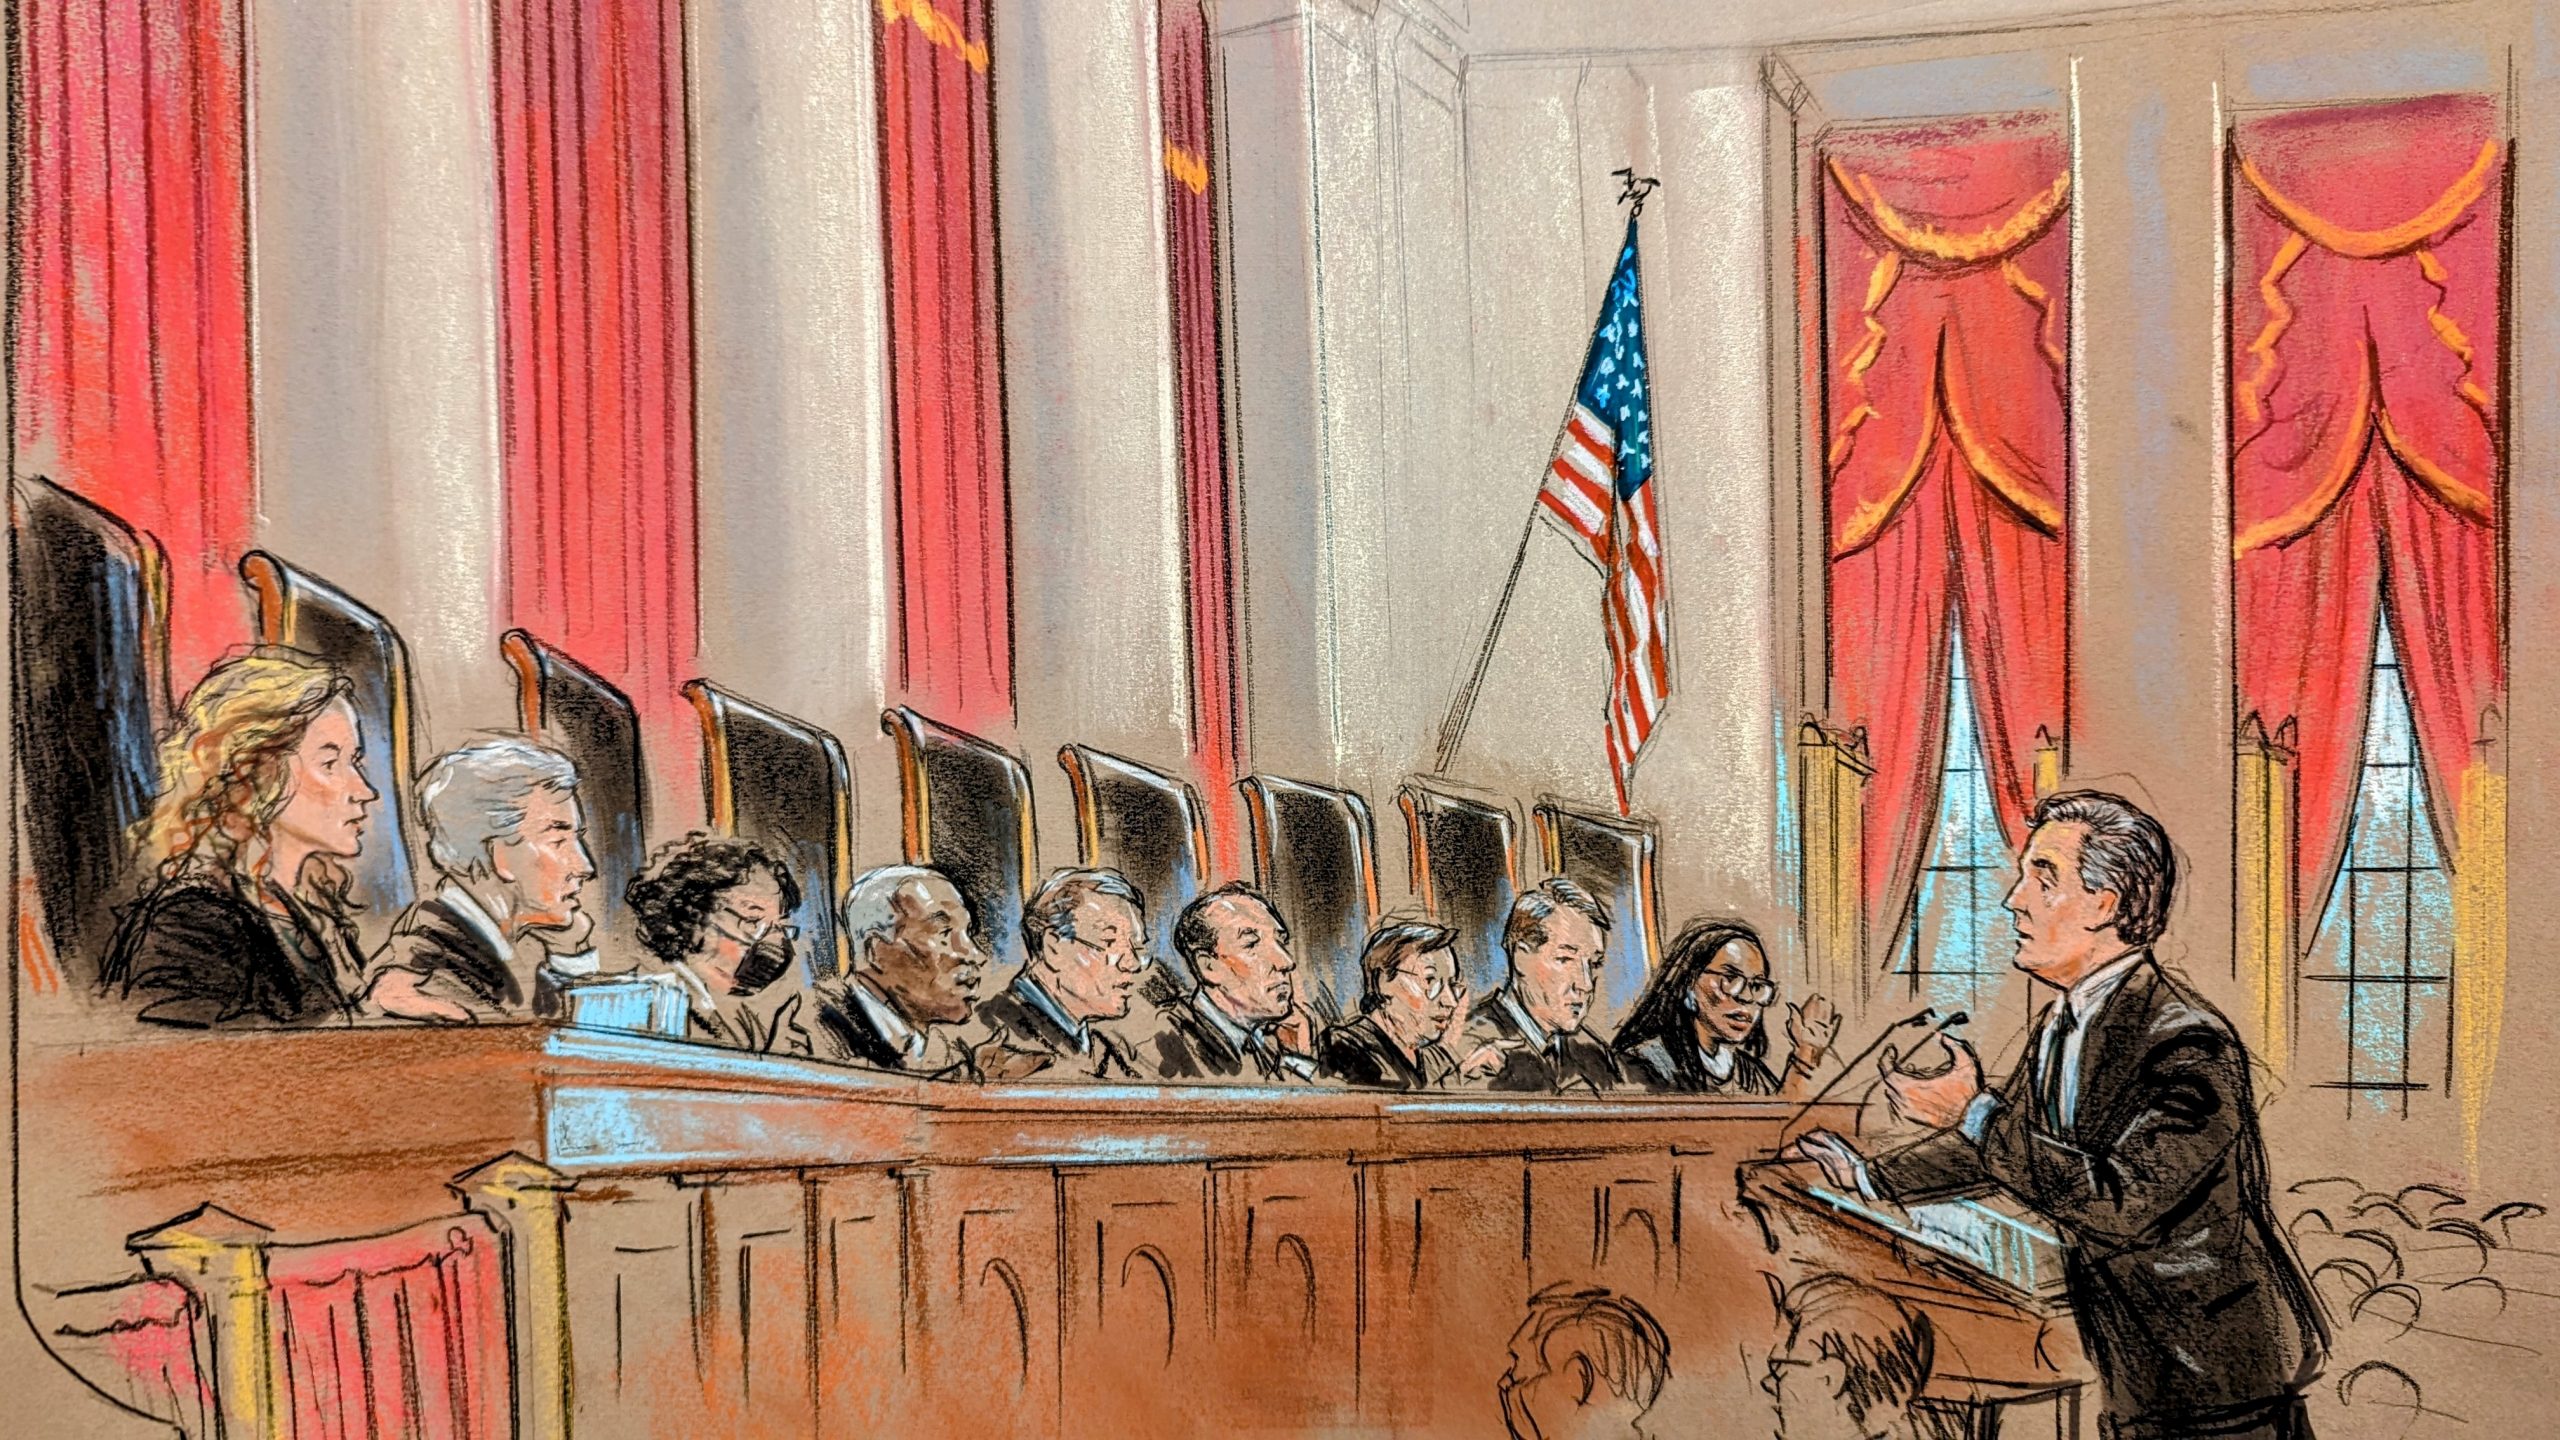 Sketch of man at the podium arguing before a full bench of justices.